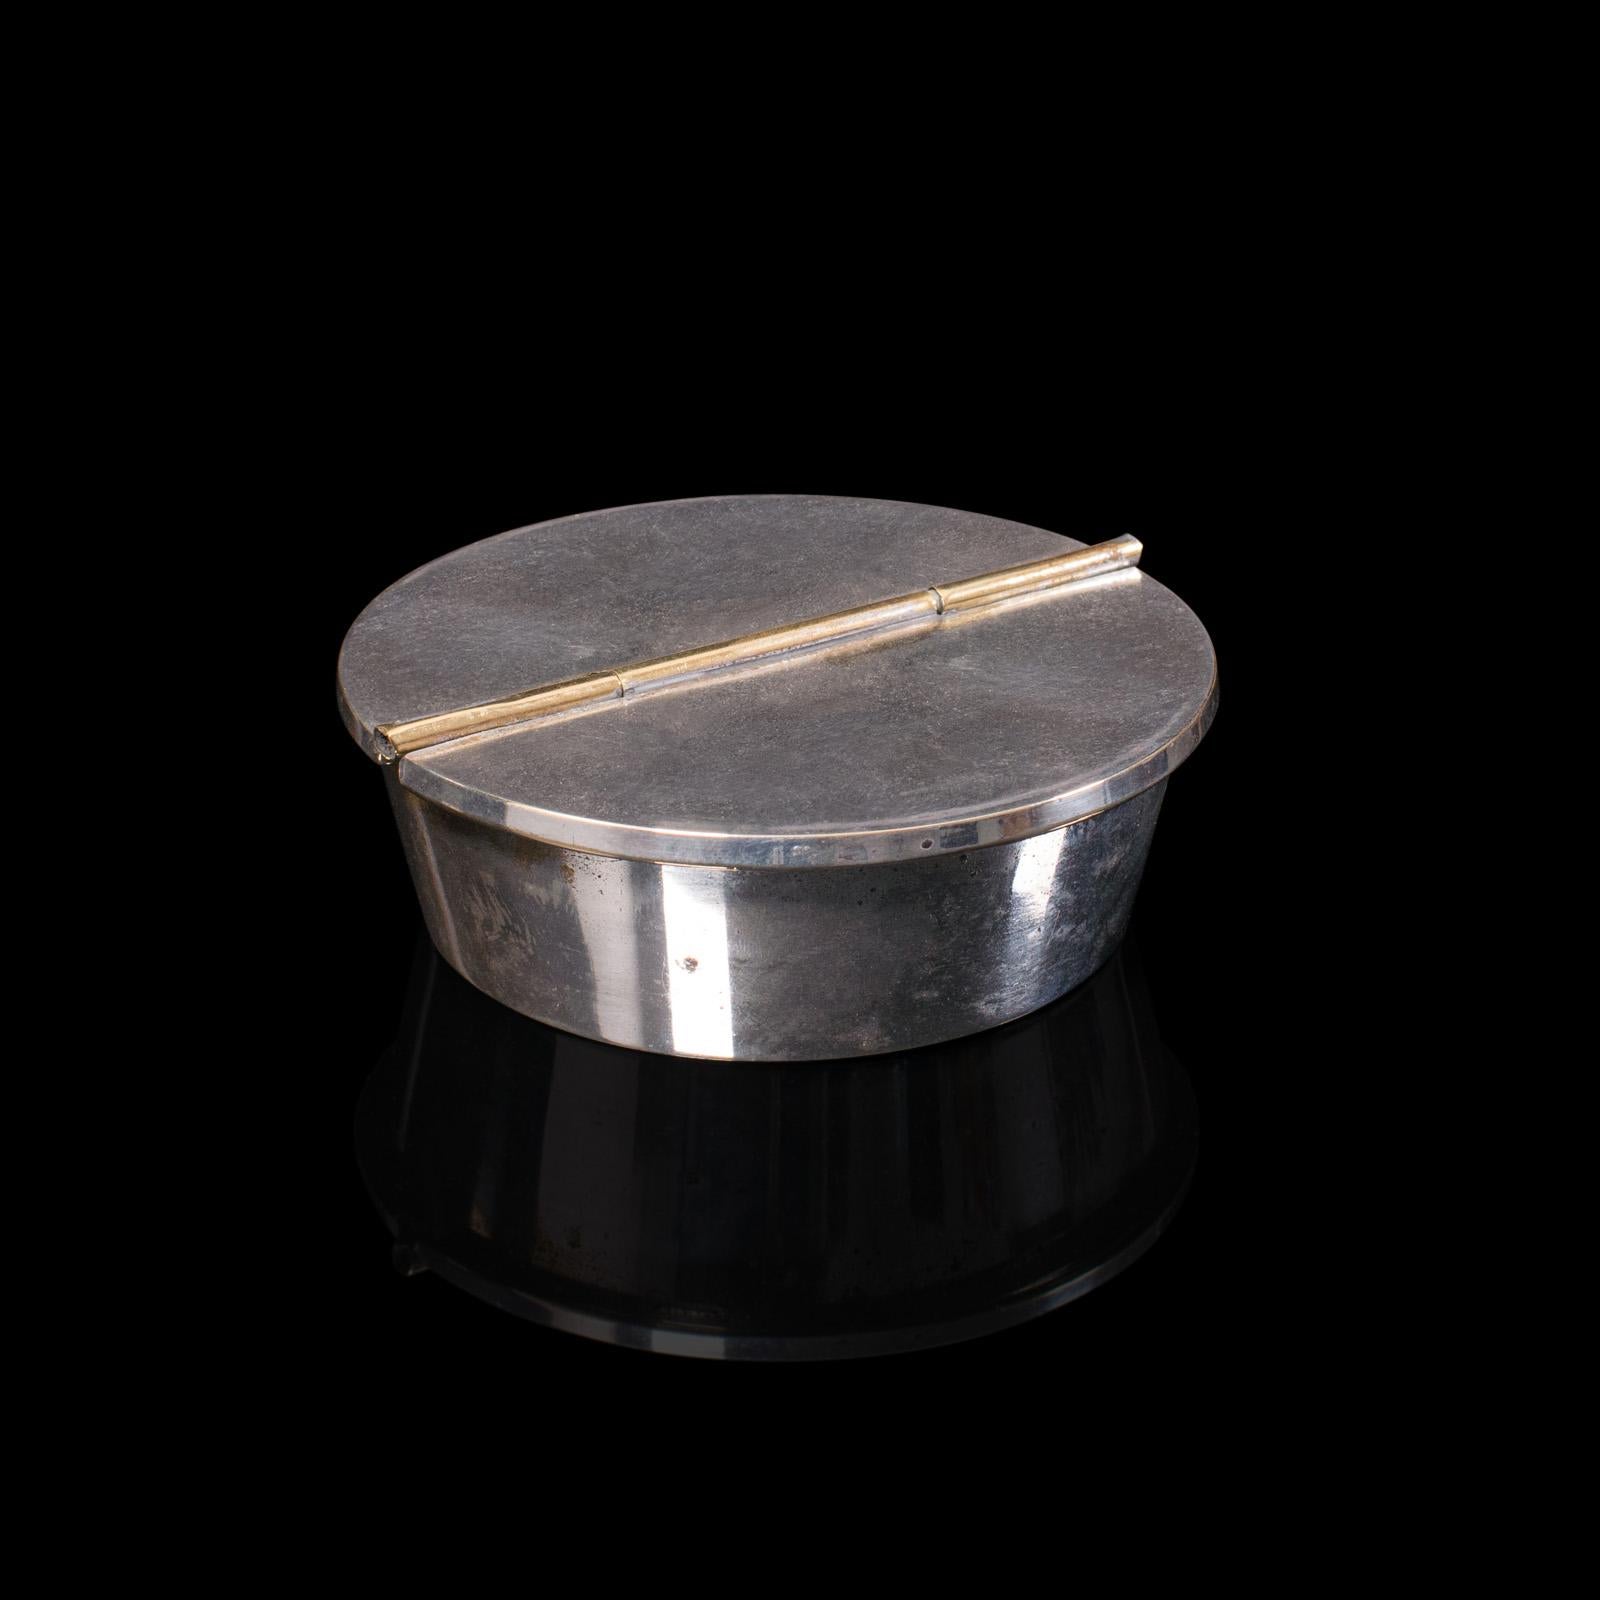 This is a small antique ash tray. An English, cast white metal lidded cigarette rest or cufflink pot, dating to the Edwardian period, circa 1910.

Charmingly petite with pleasing finish
Displays a desirable aged patina throughout
Bright